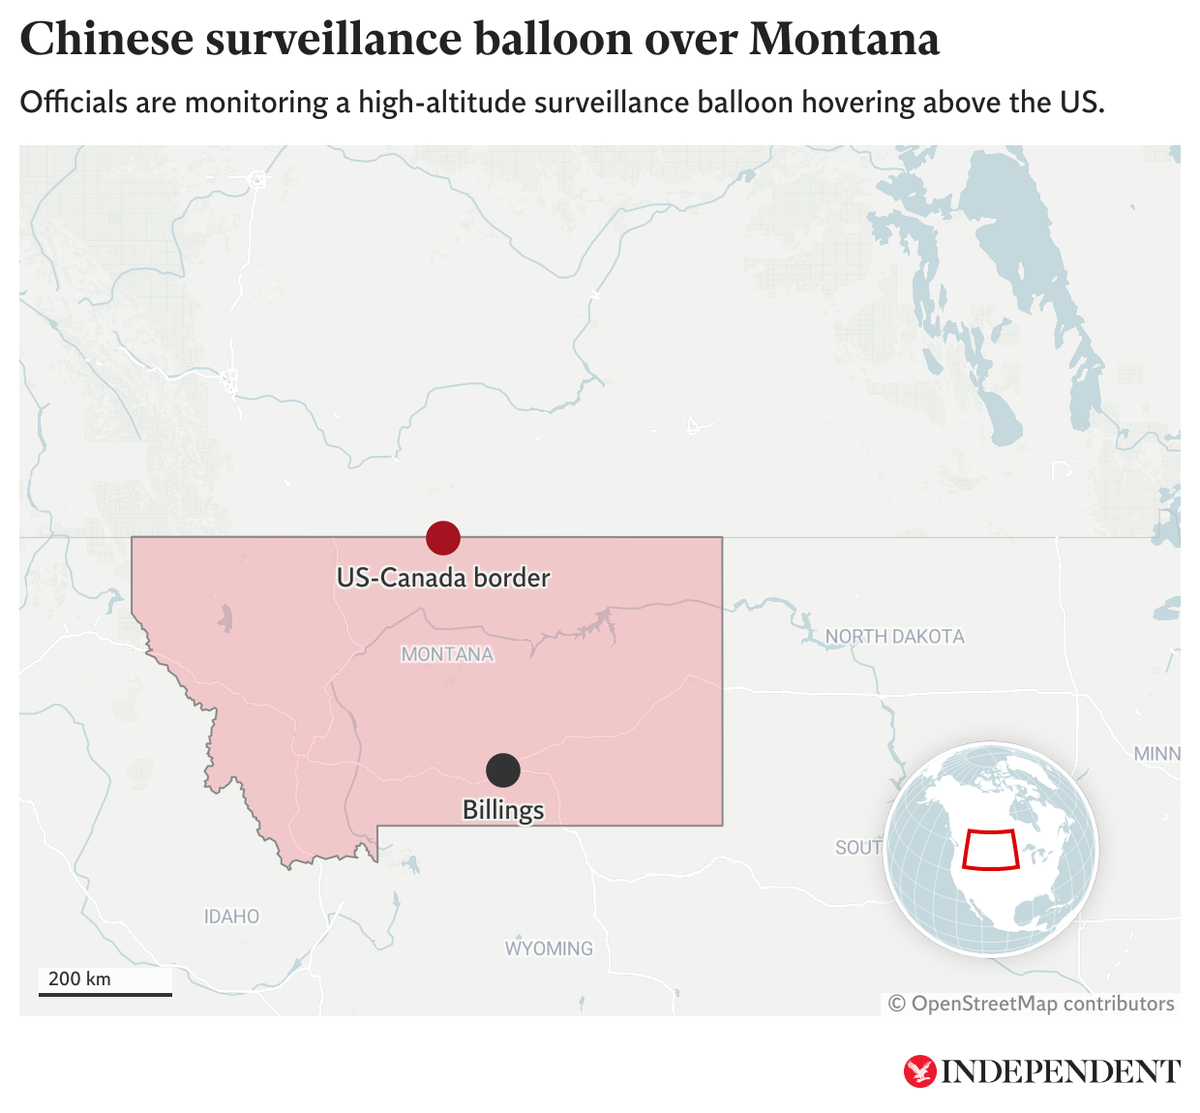 Where is the Chinese spy balloon now?